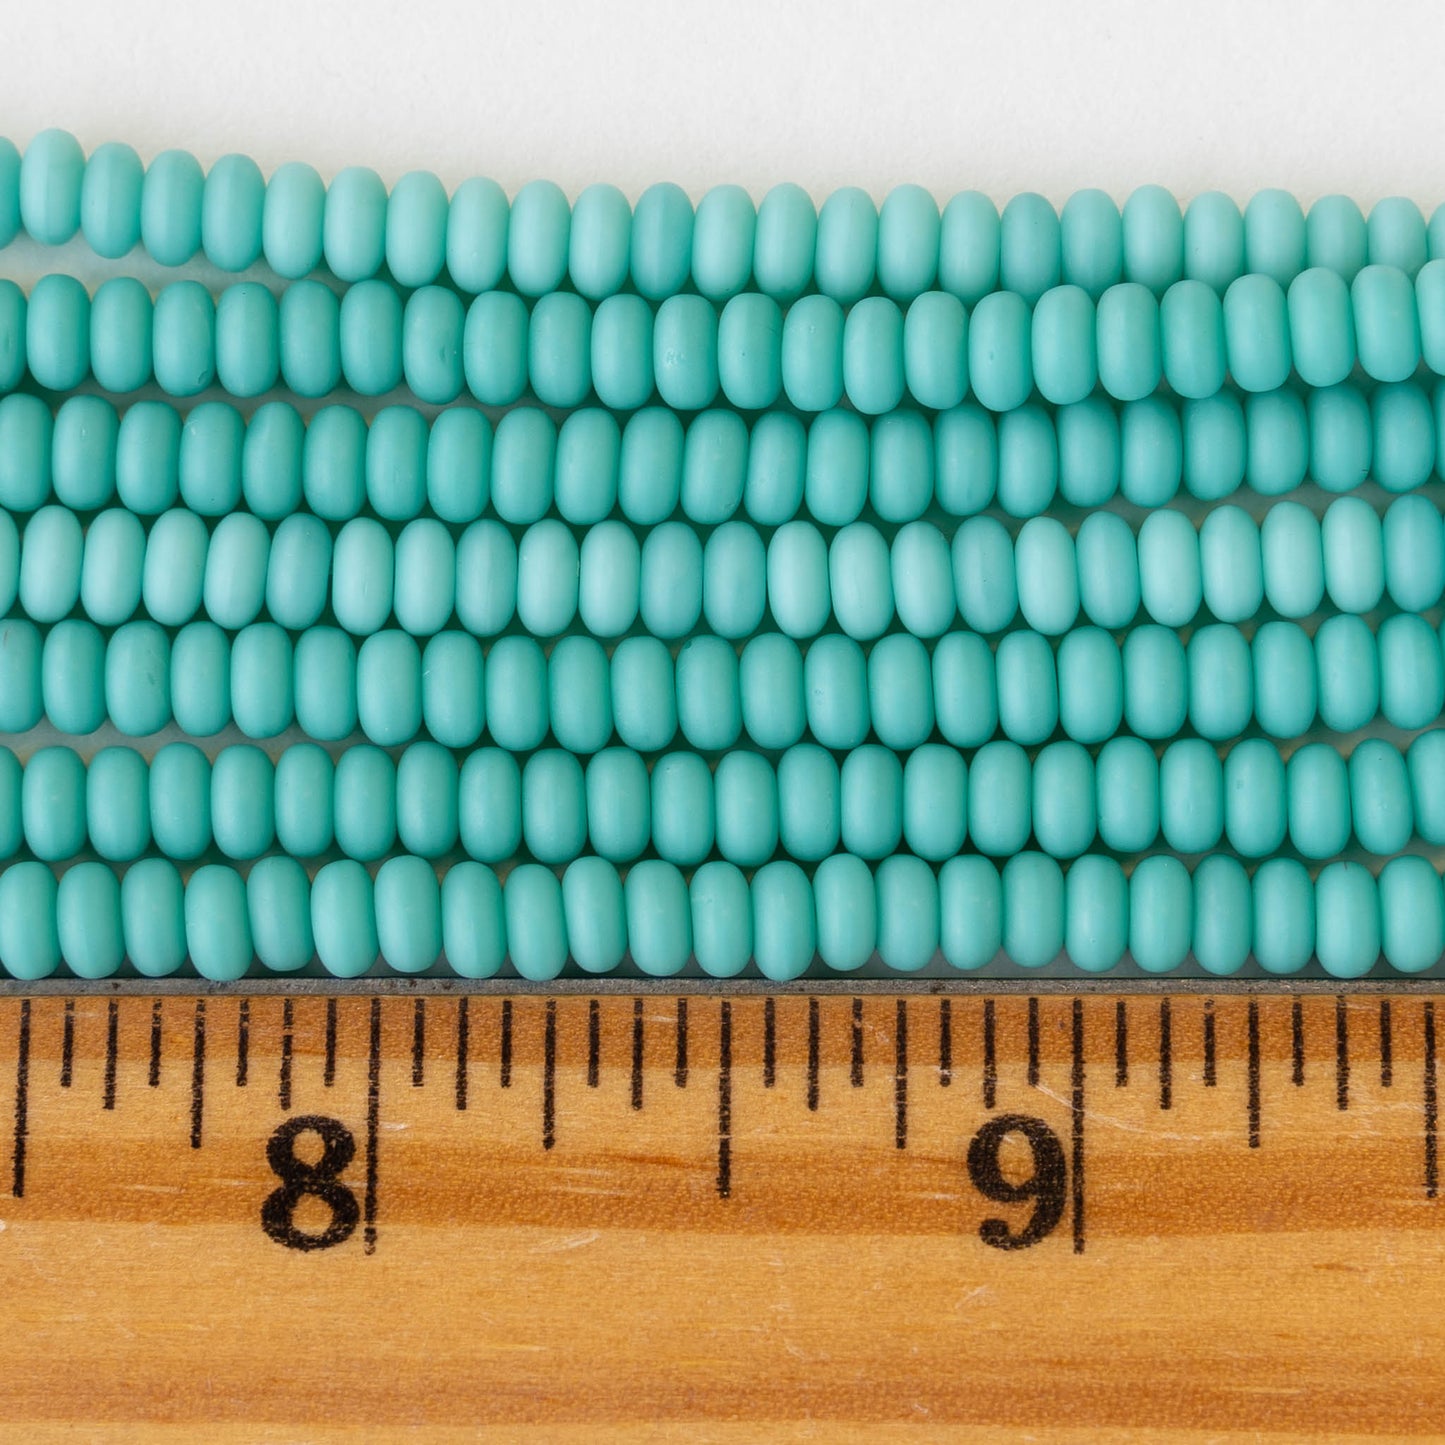 4mm Rondelle Beads - Turquoise Matte - 100